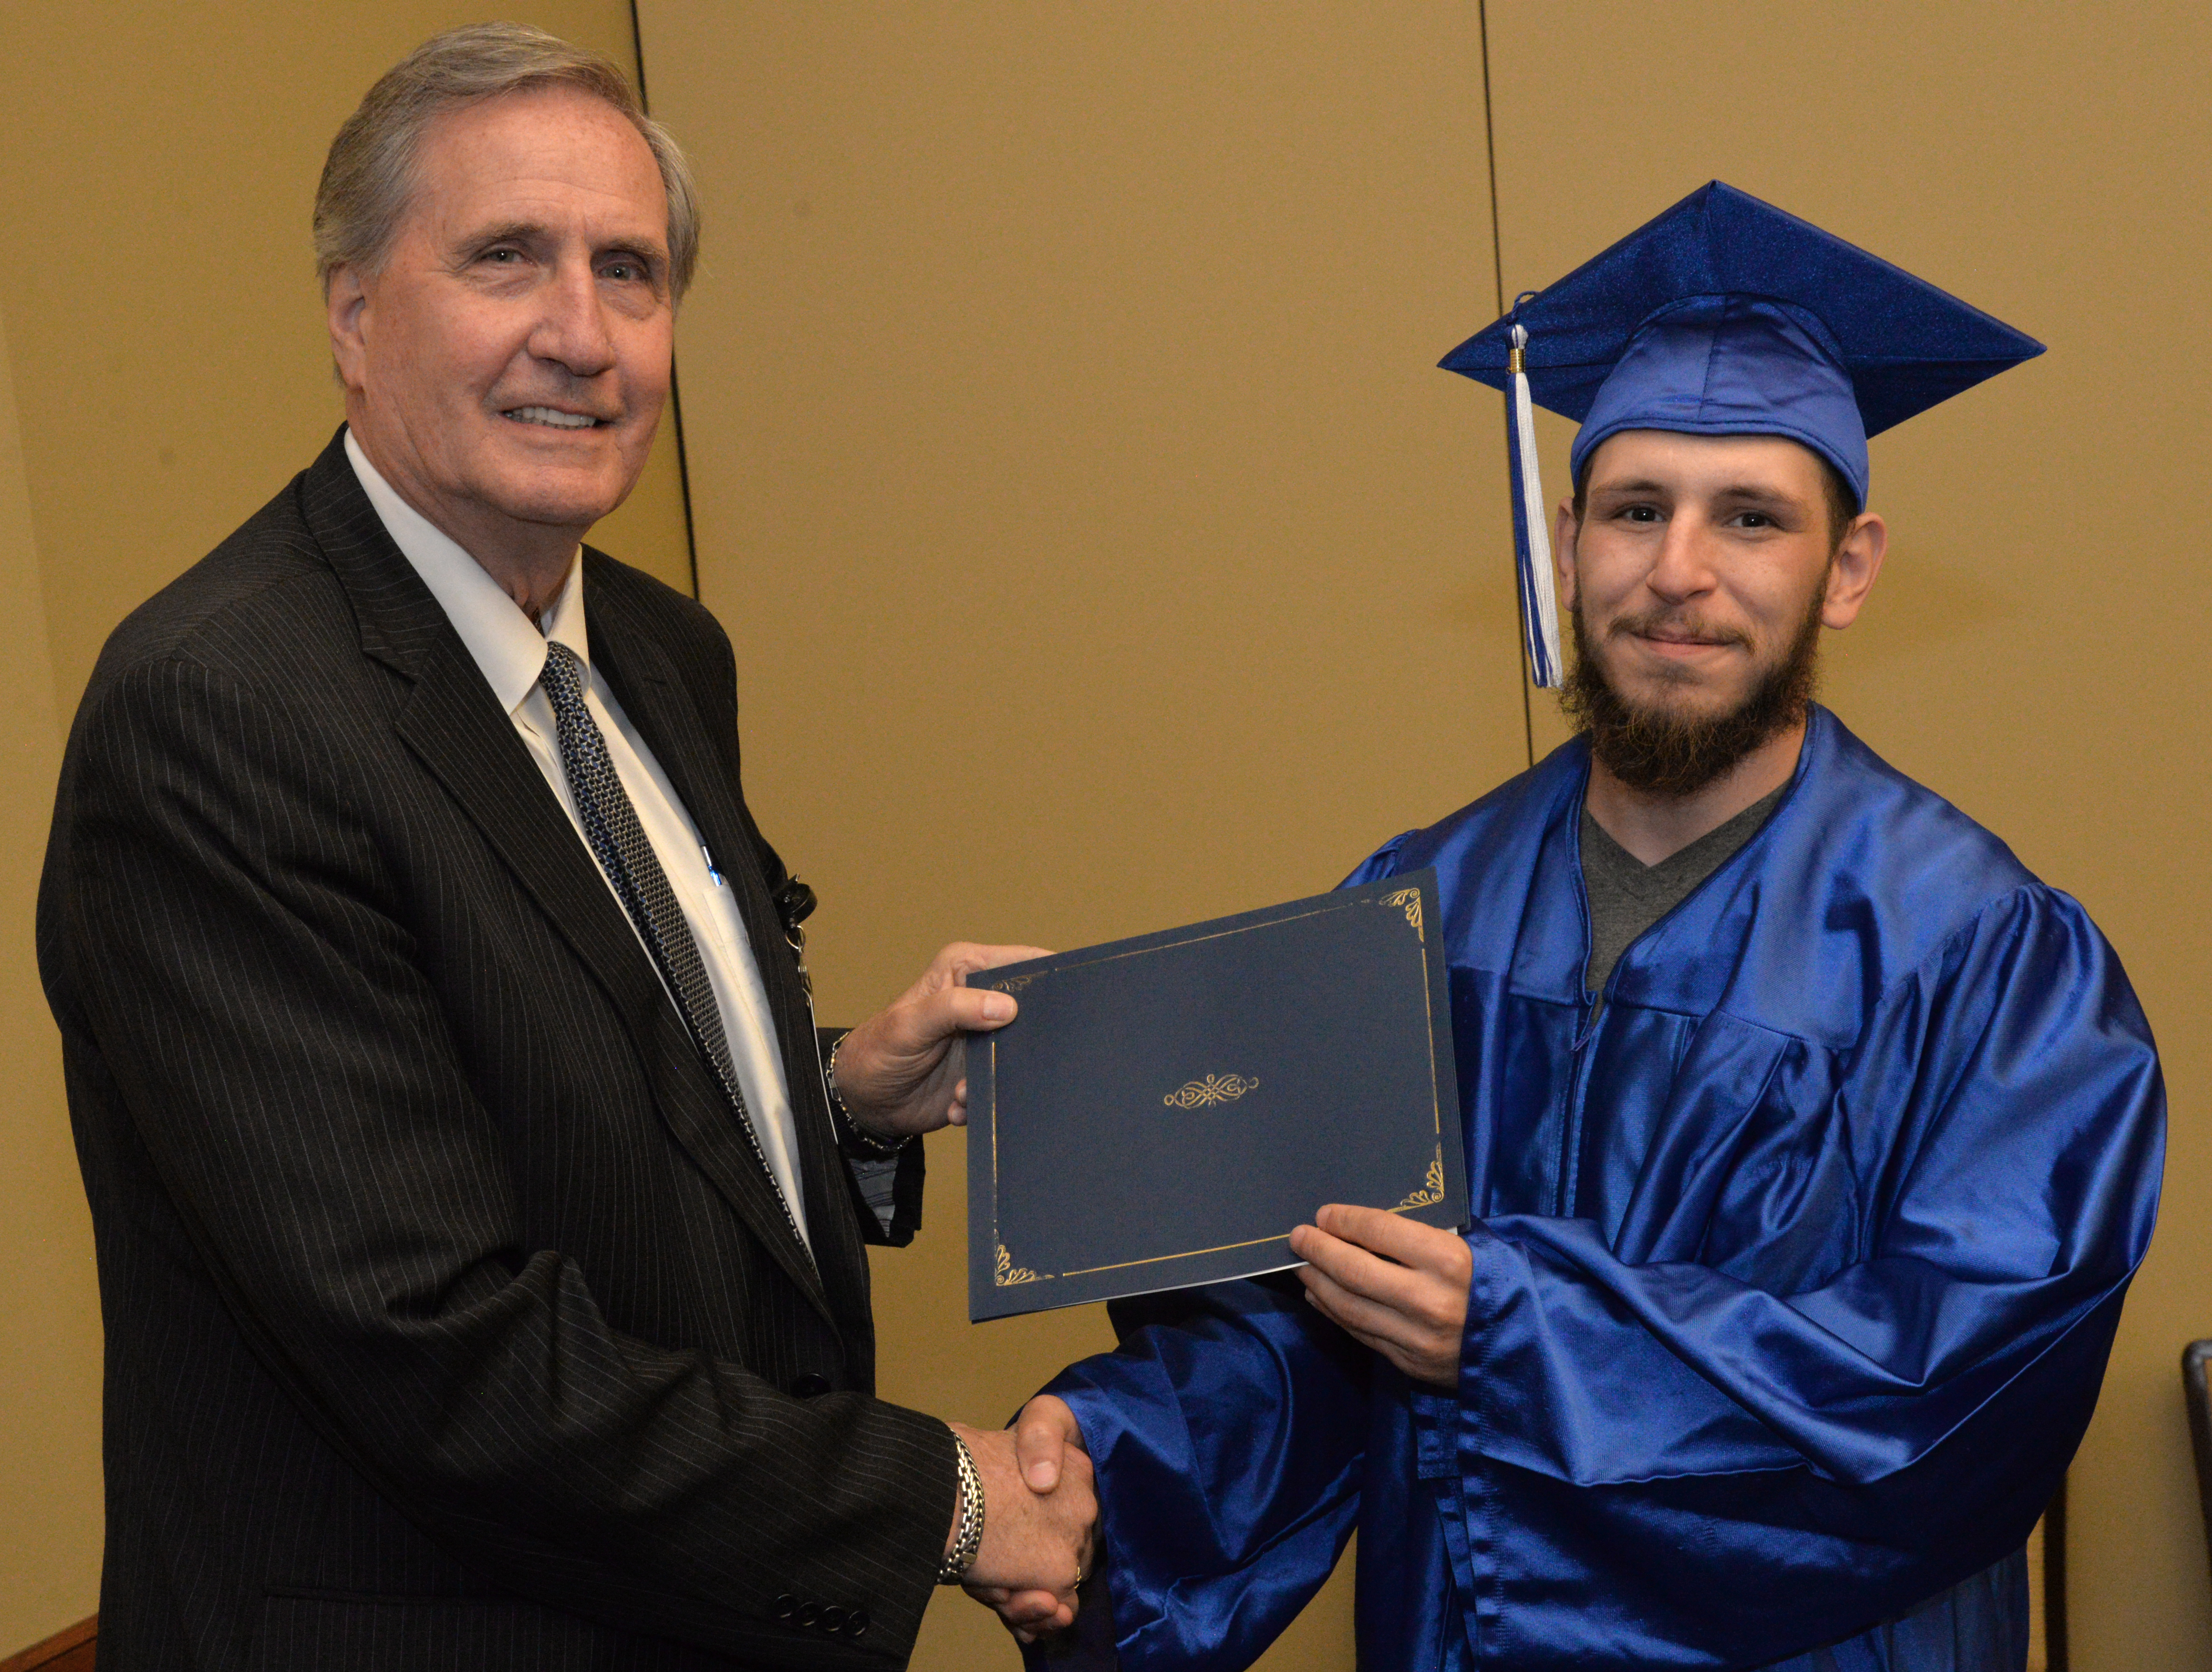 Christian Rodriguez receives his high school diploma from SCC's President, Dr. Don Tomas